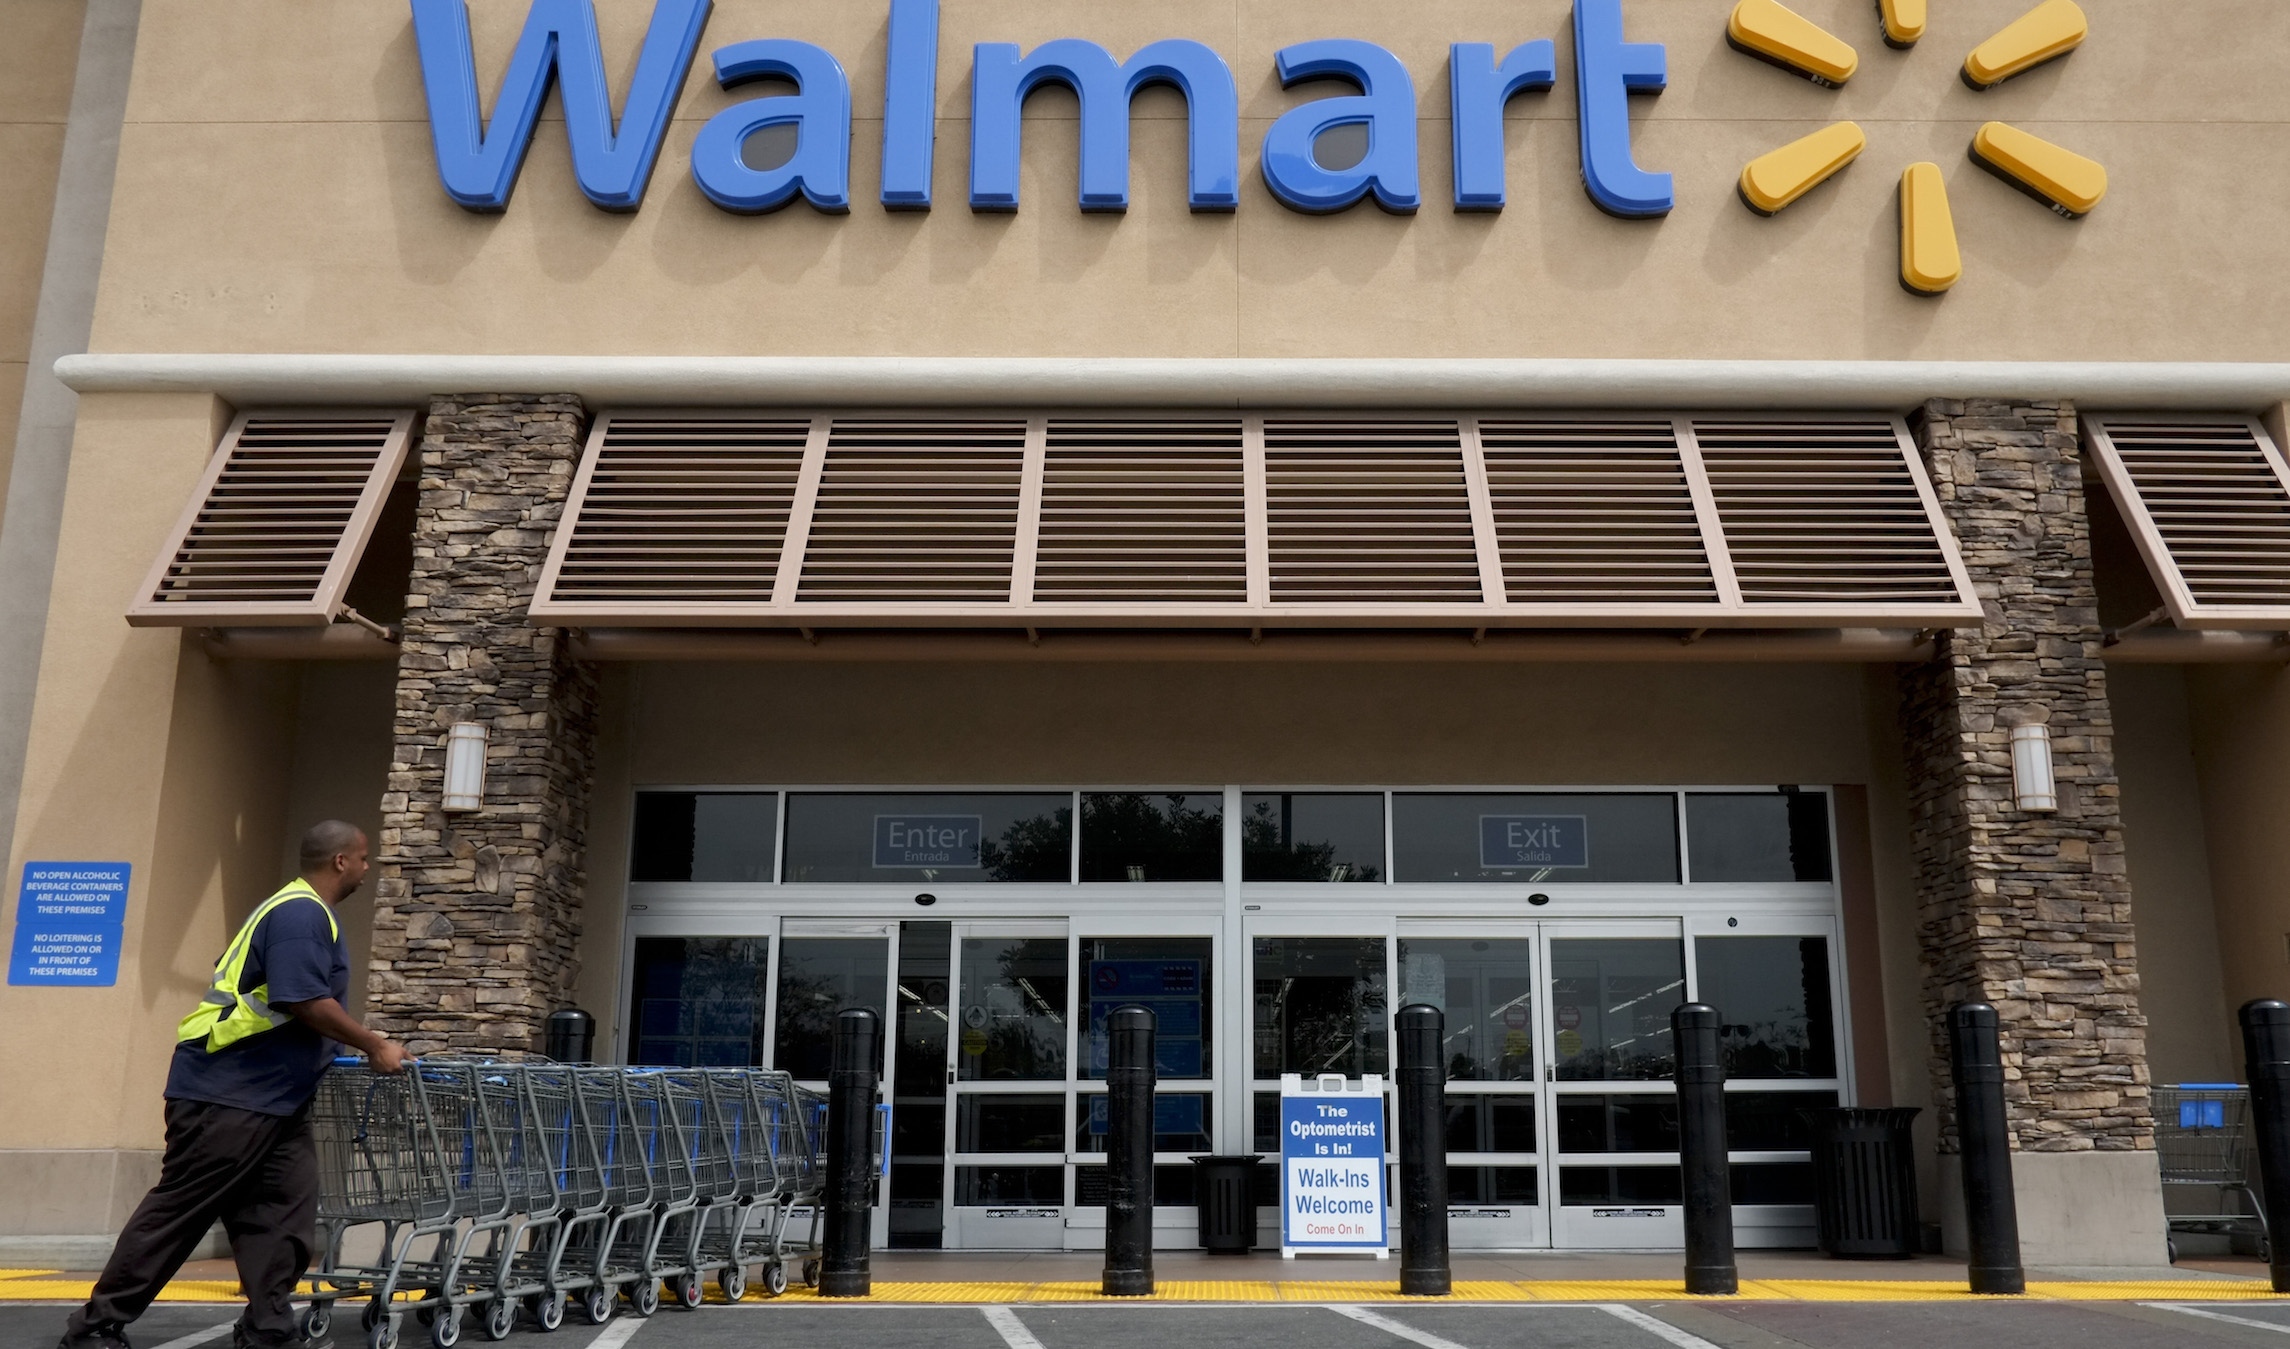 Walmart wage increase benefits young workers the most Washington Examiner